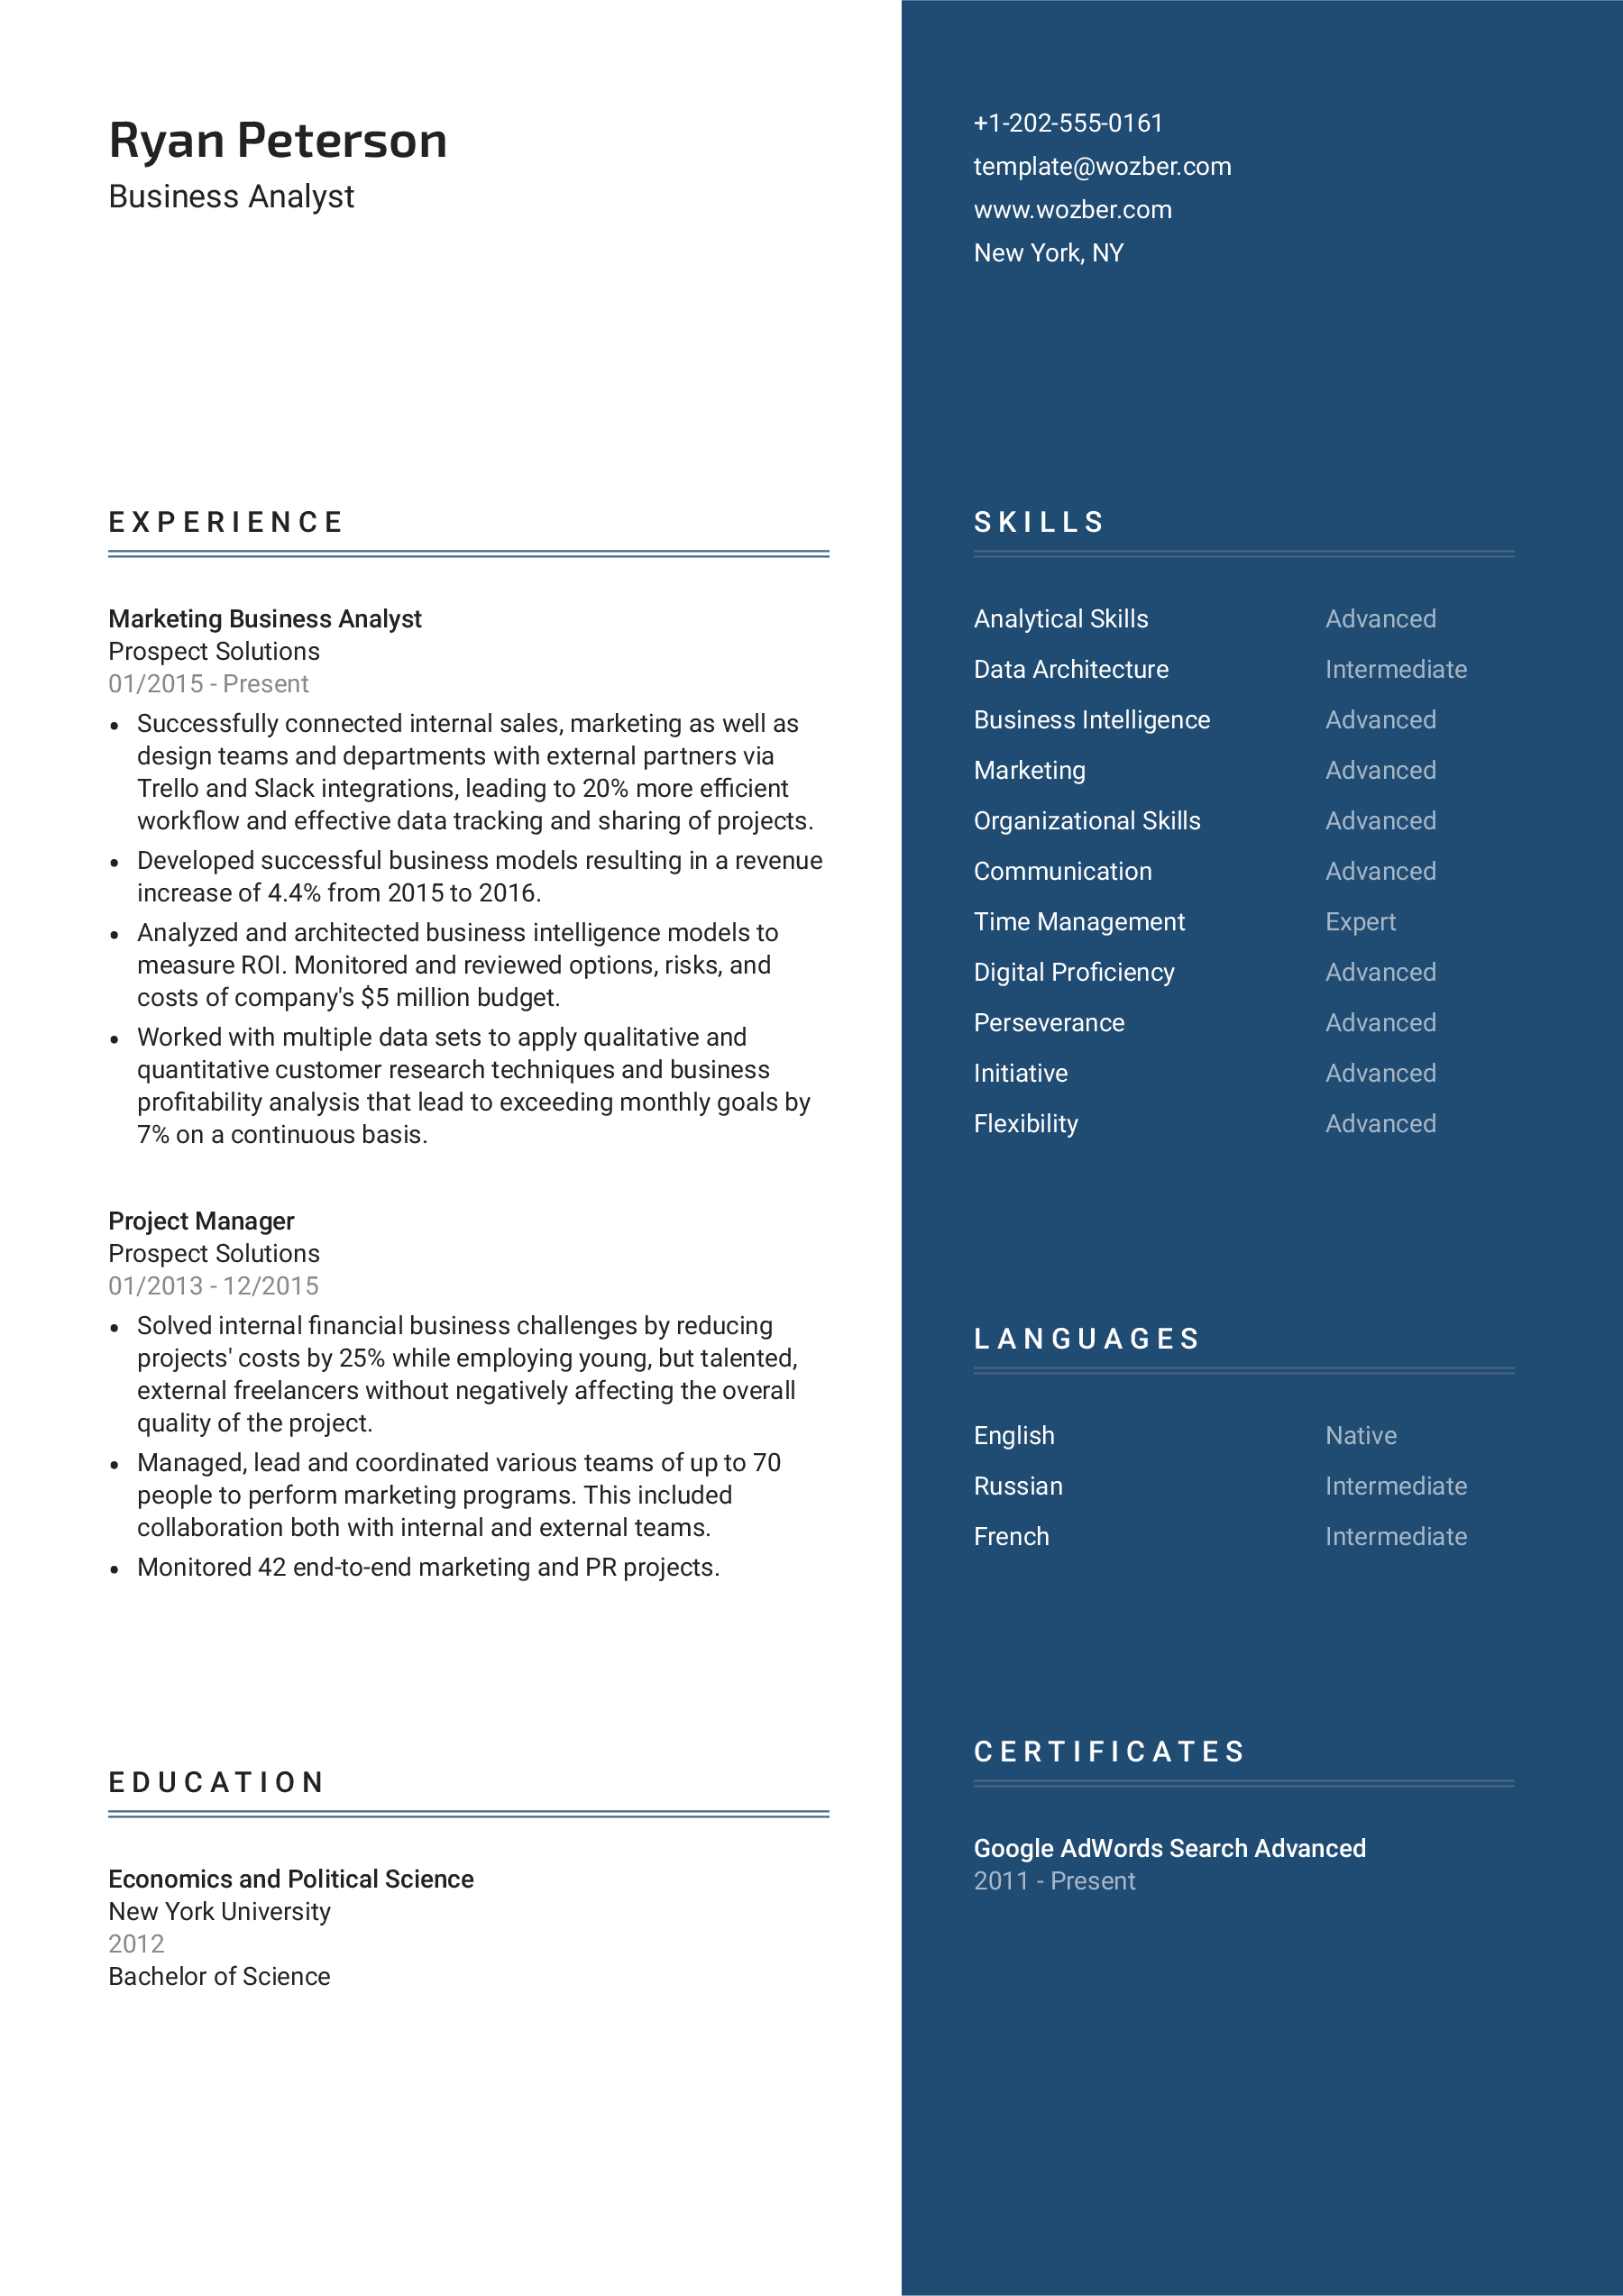 An old-fashioned yet still modern resume template to choose.